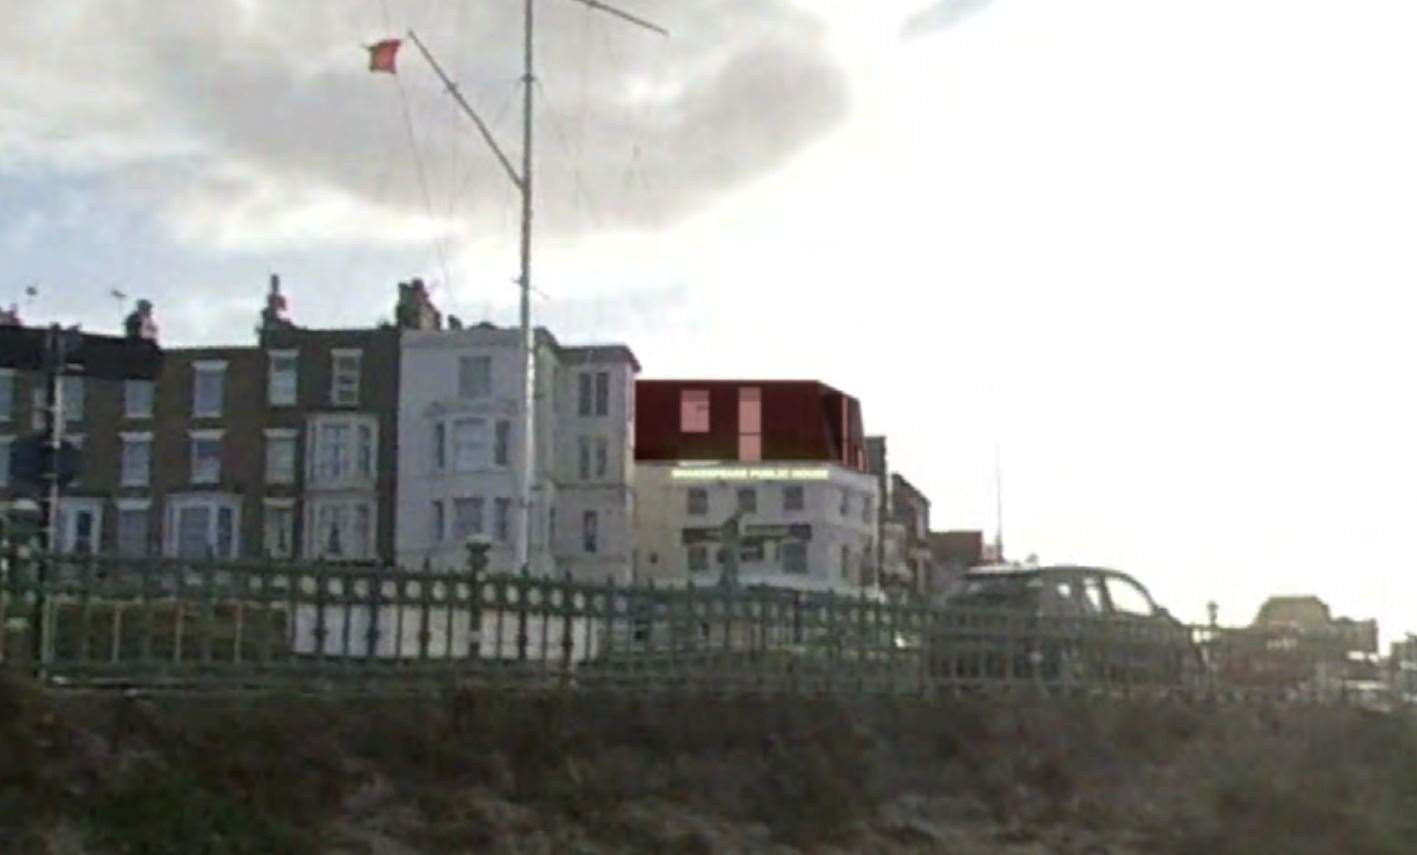 The pub would have had an extra floor and a roof terrace overlooking Margate's coastline